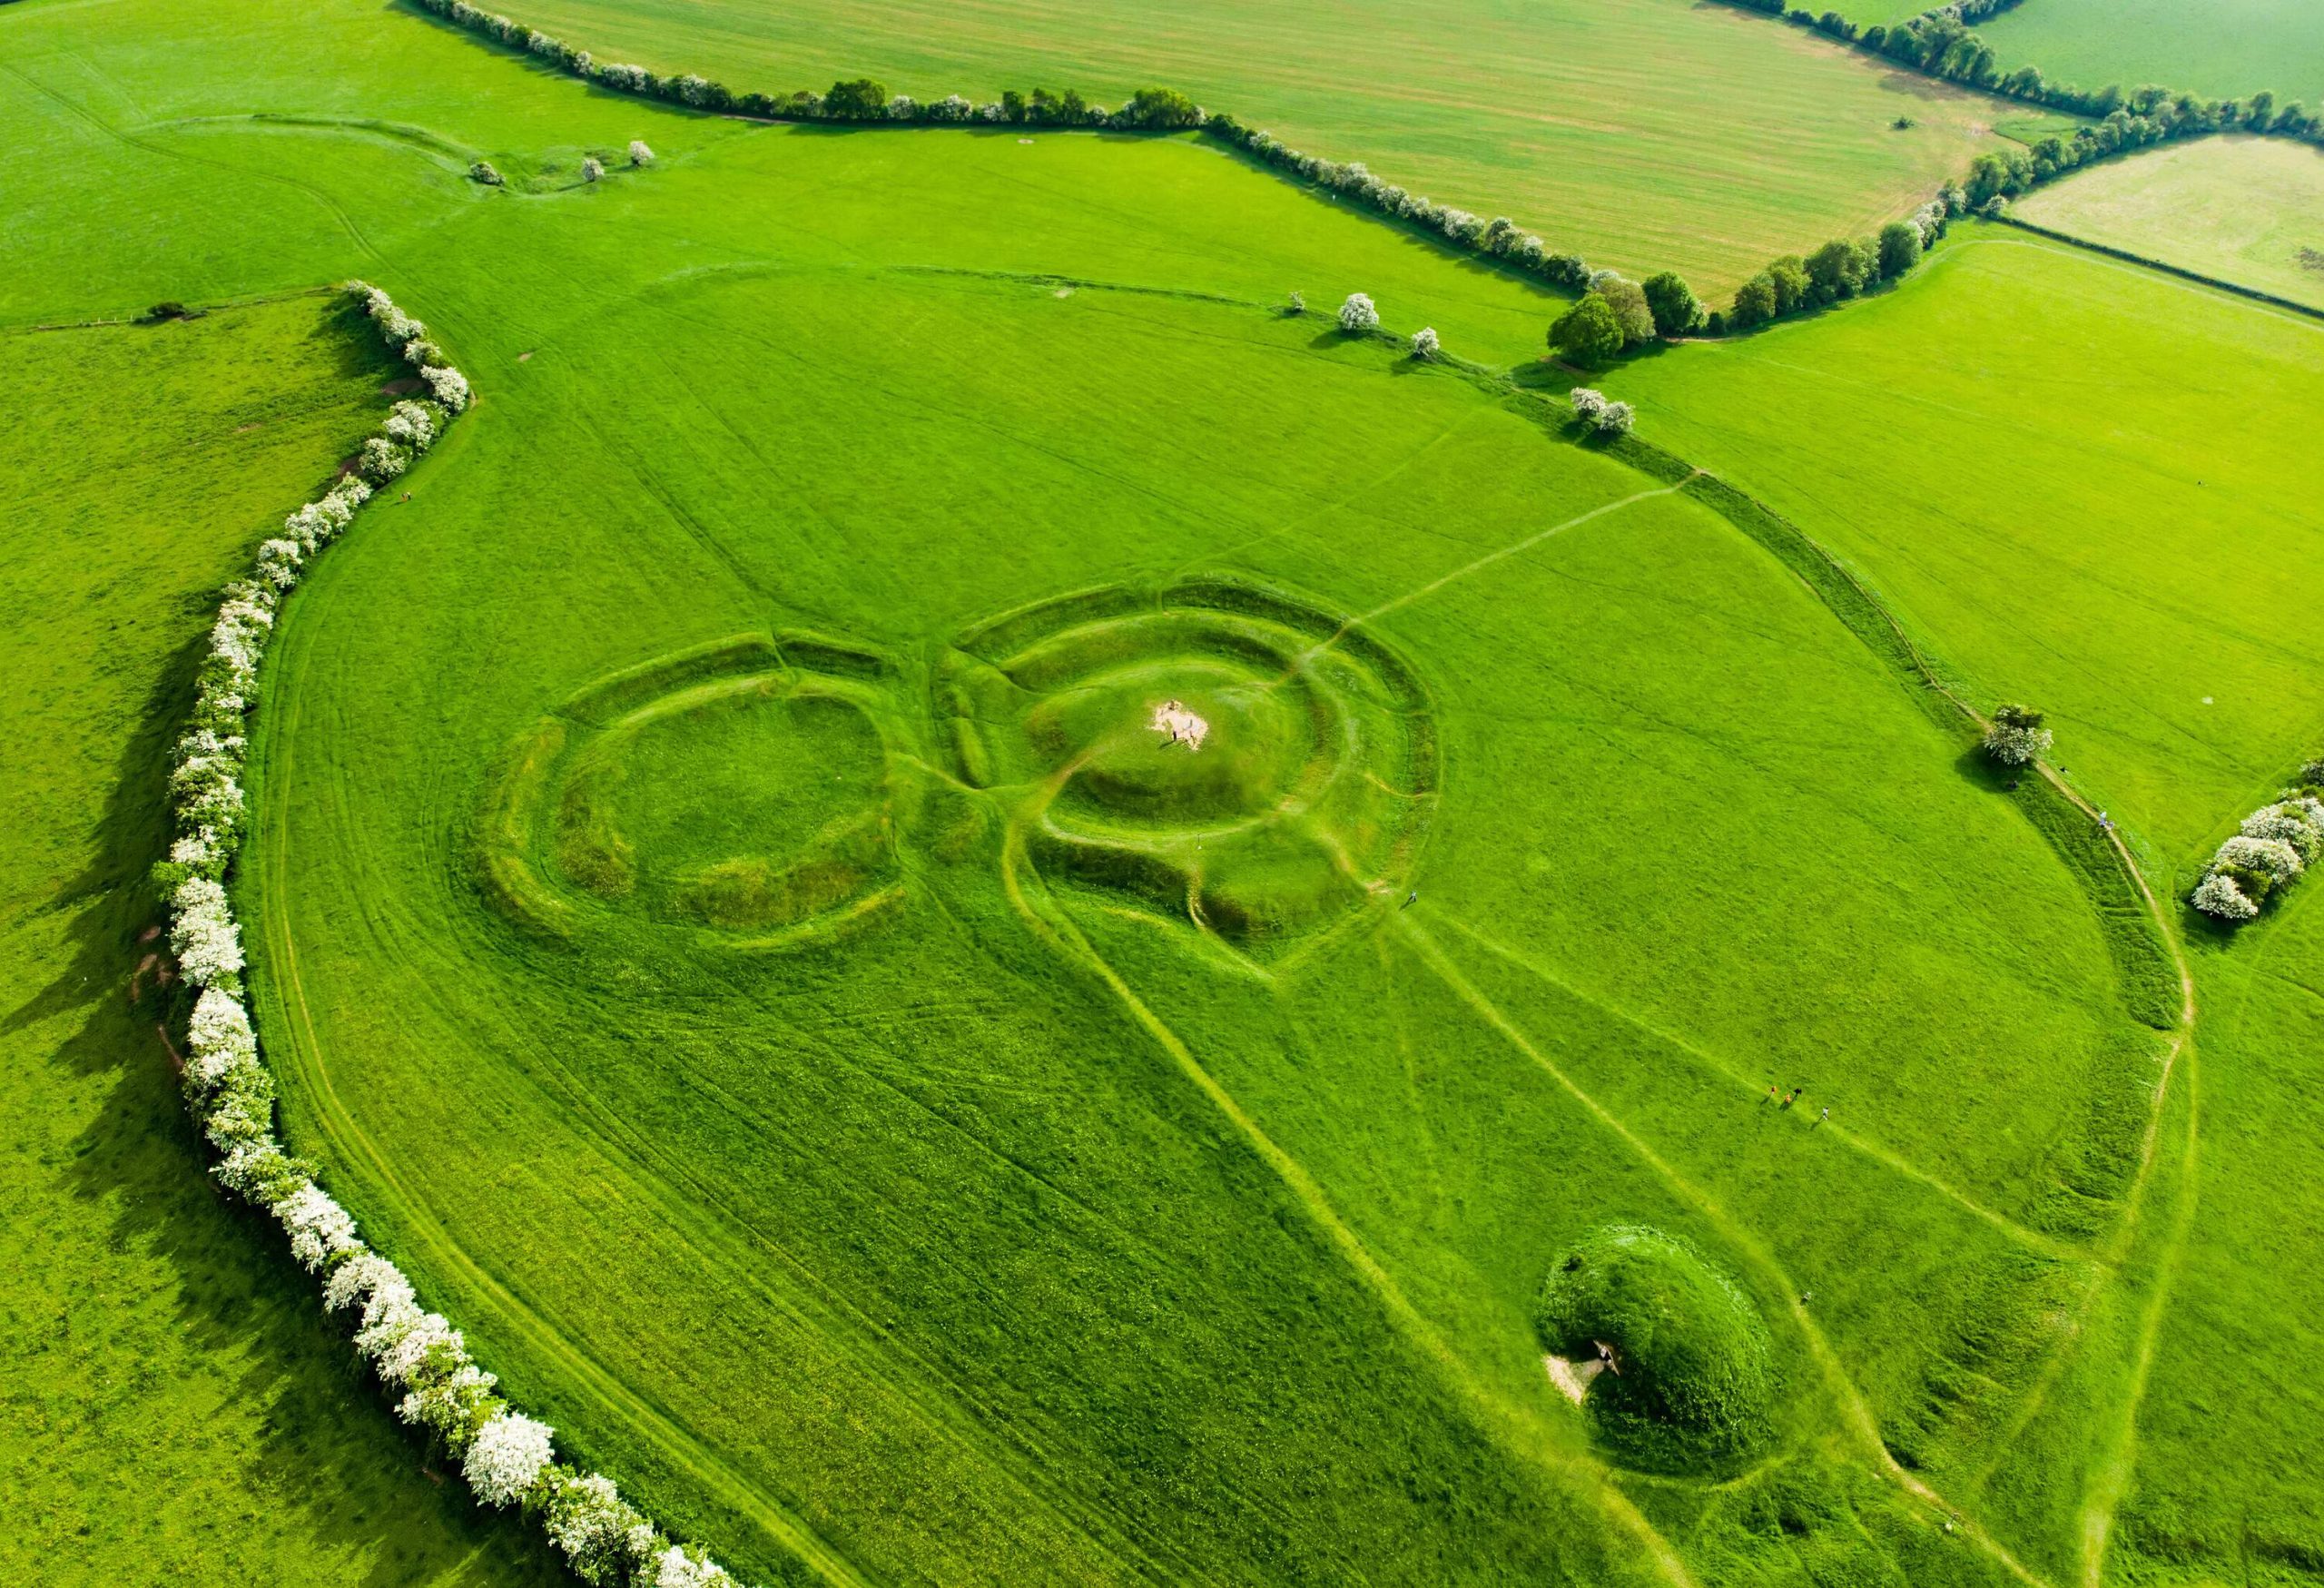 Aerial view of the Hill of Tara, an archaeological complex, containing a number of ancient monuments and, according to tradition, used as the seat of the High King of Ireland, County Meath, Ireland